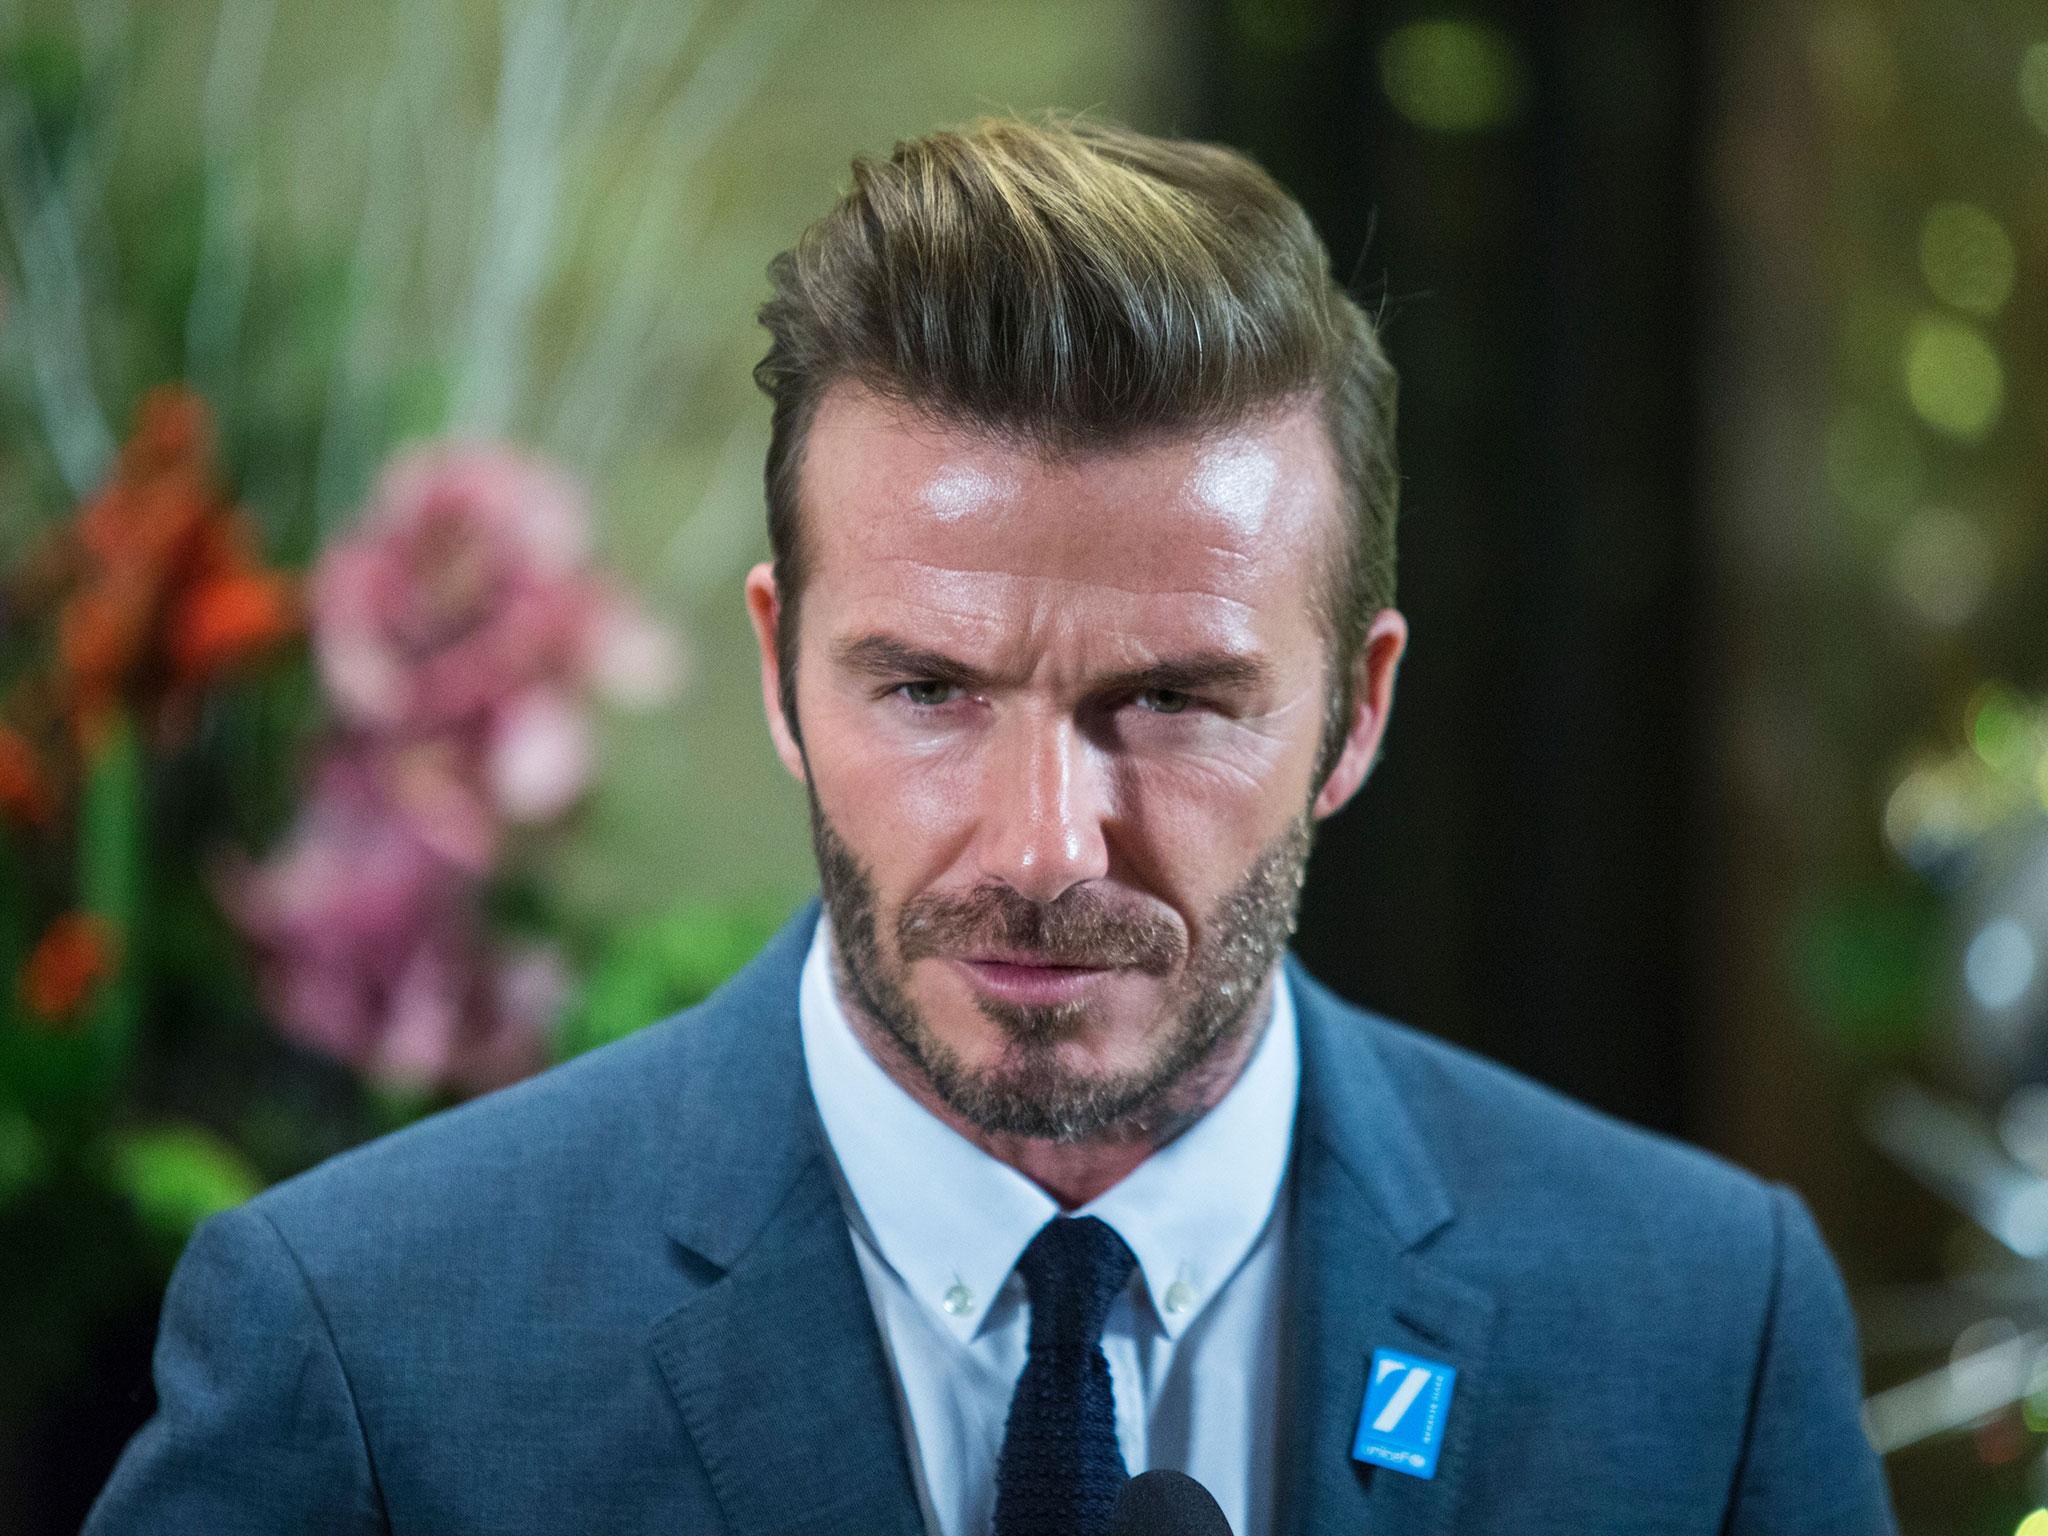 David Beckham's latest suit teaches a lesson in style